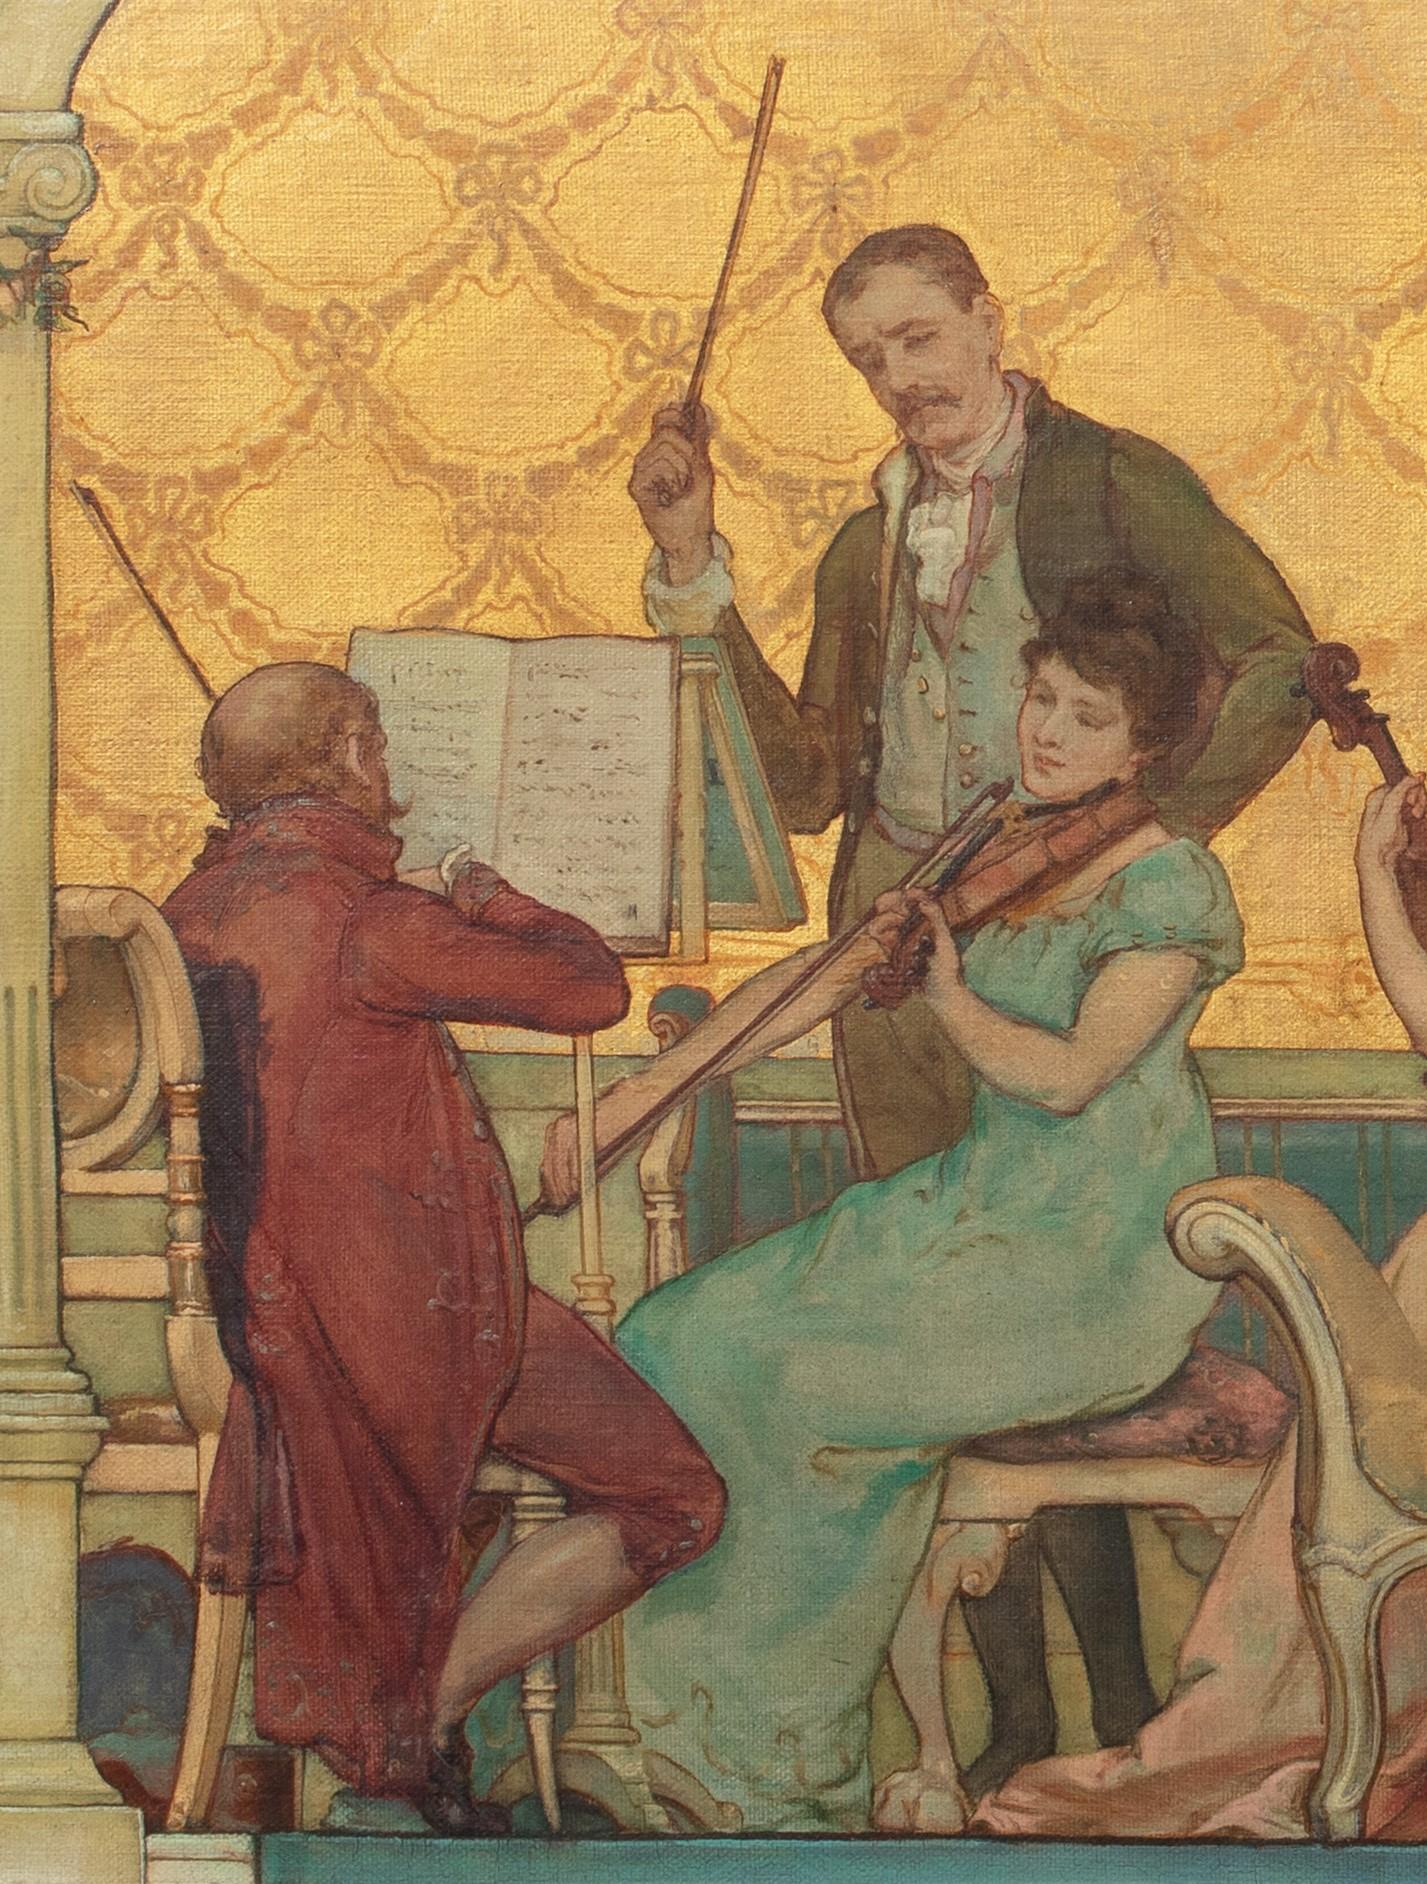 The String Quartet, 19th Century by GERTRUDE HOMAN (1856-1905) - Brown Portrait Painting by Unknown